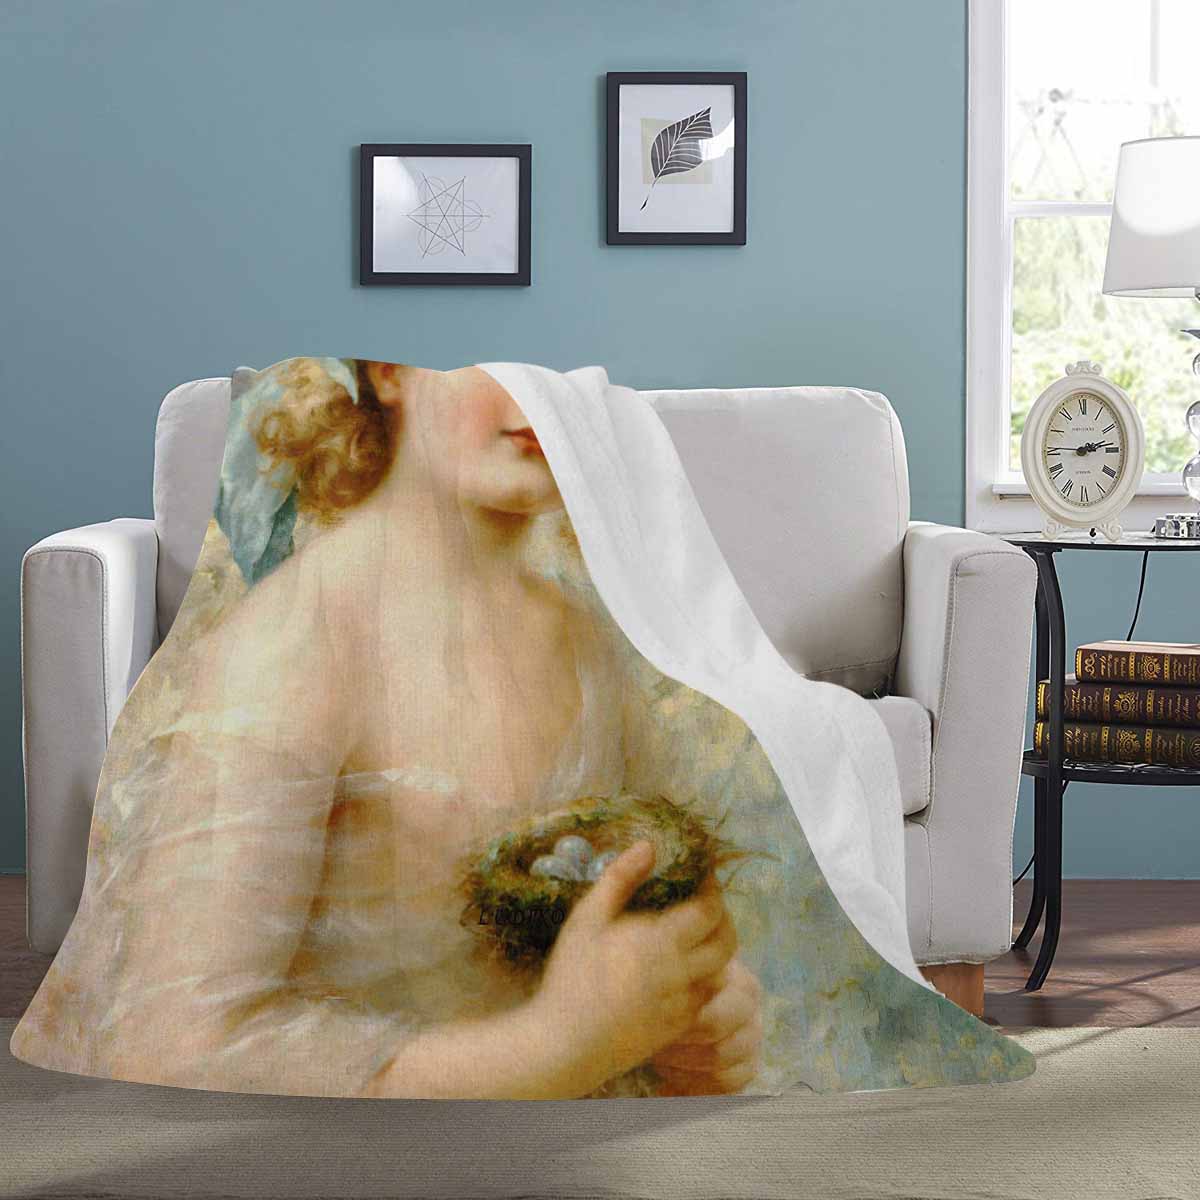 Victorian Girl Design BLANKET, LARGE 60 in x 80 in, Girl Holding a Nest C30